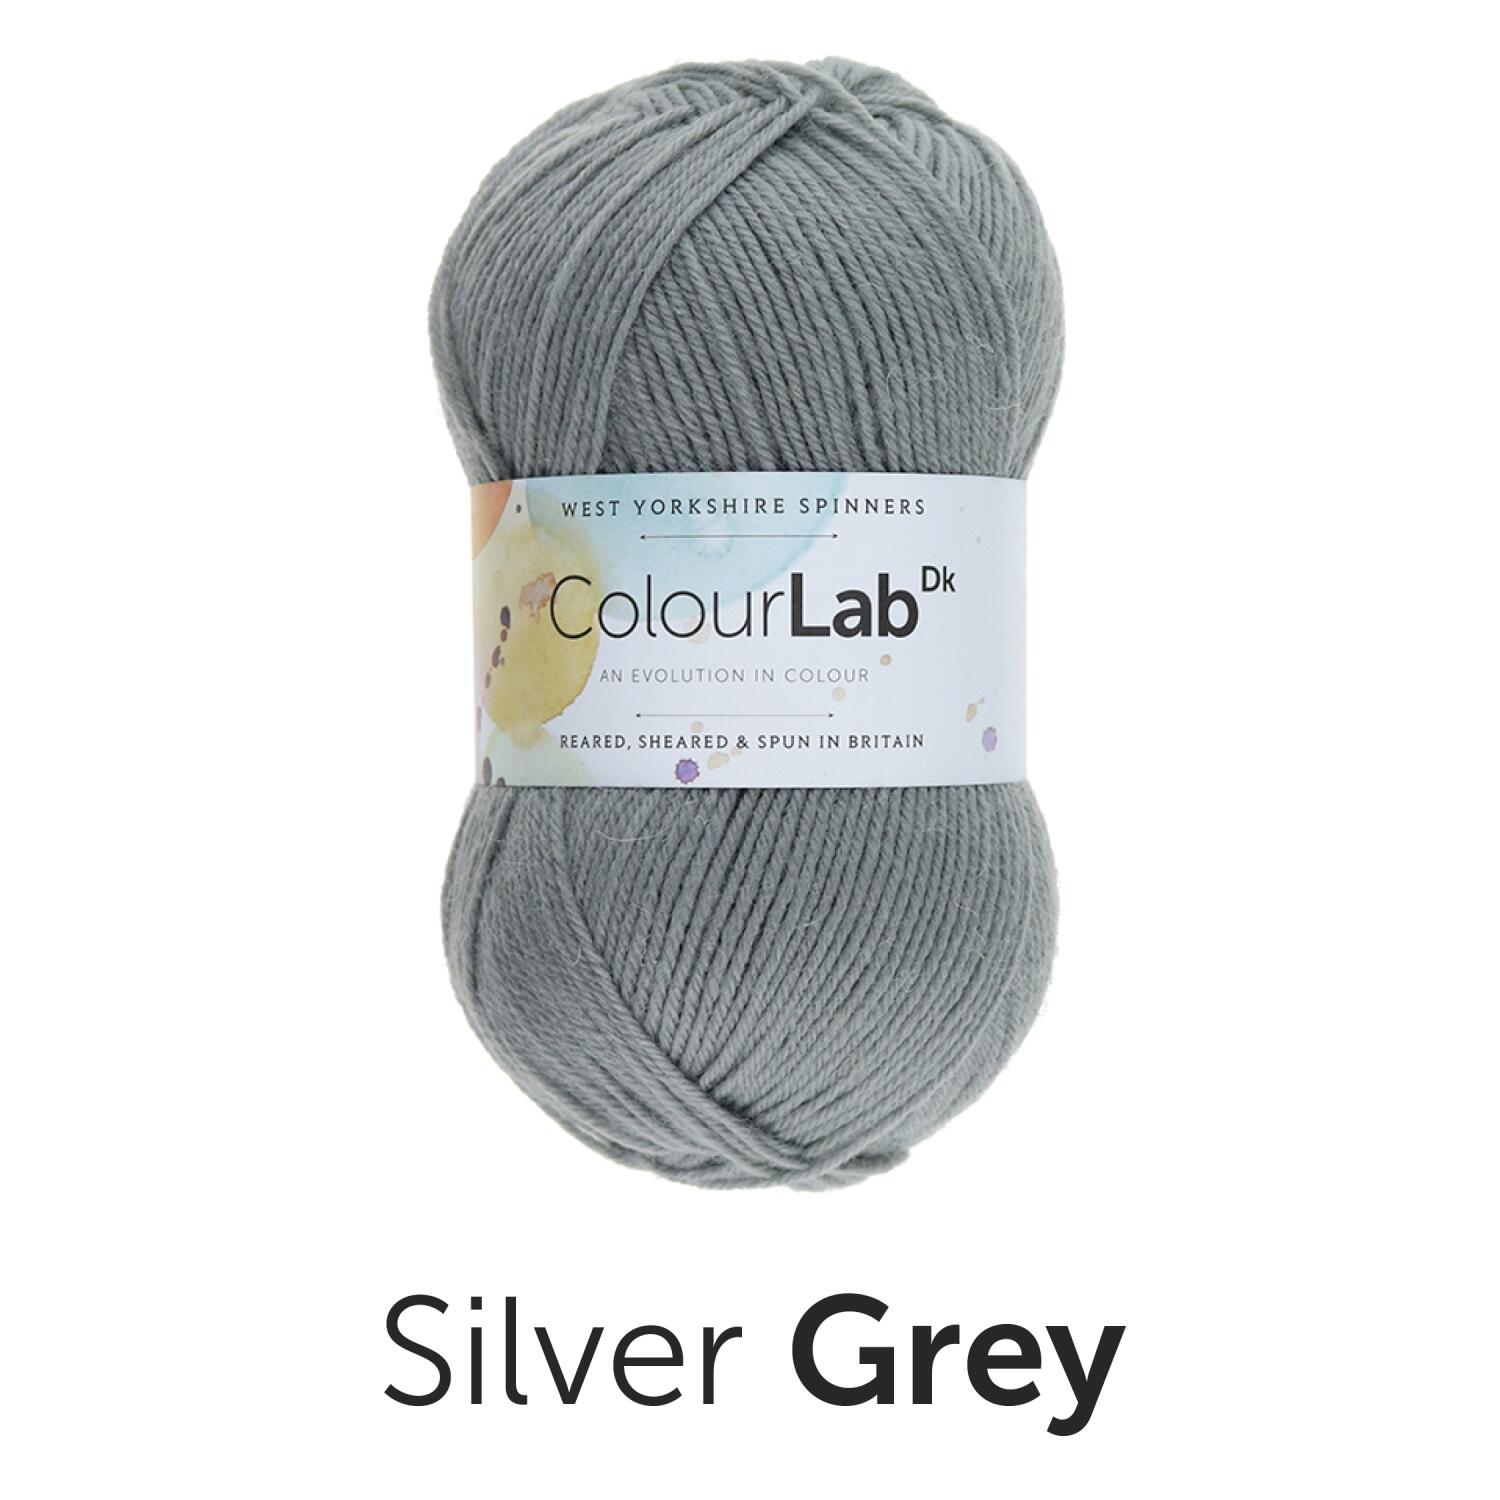 West Yorkshire Spinners ColourLab DK Unis Farbe: 137 silver grey